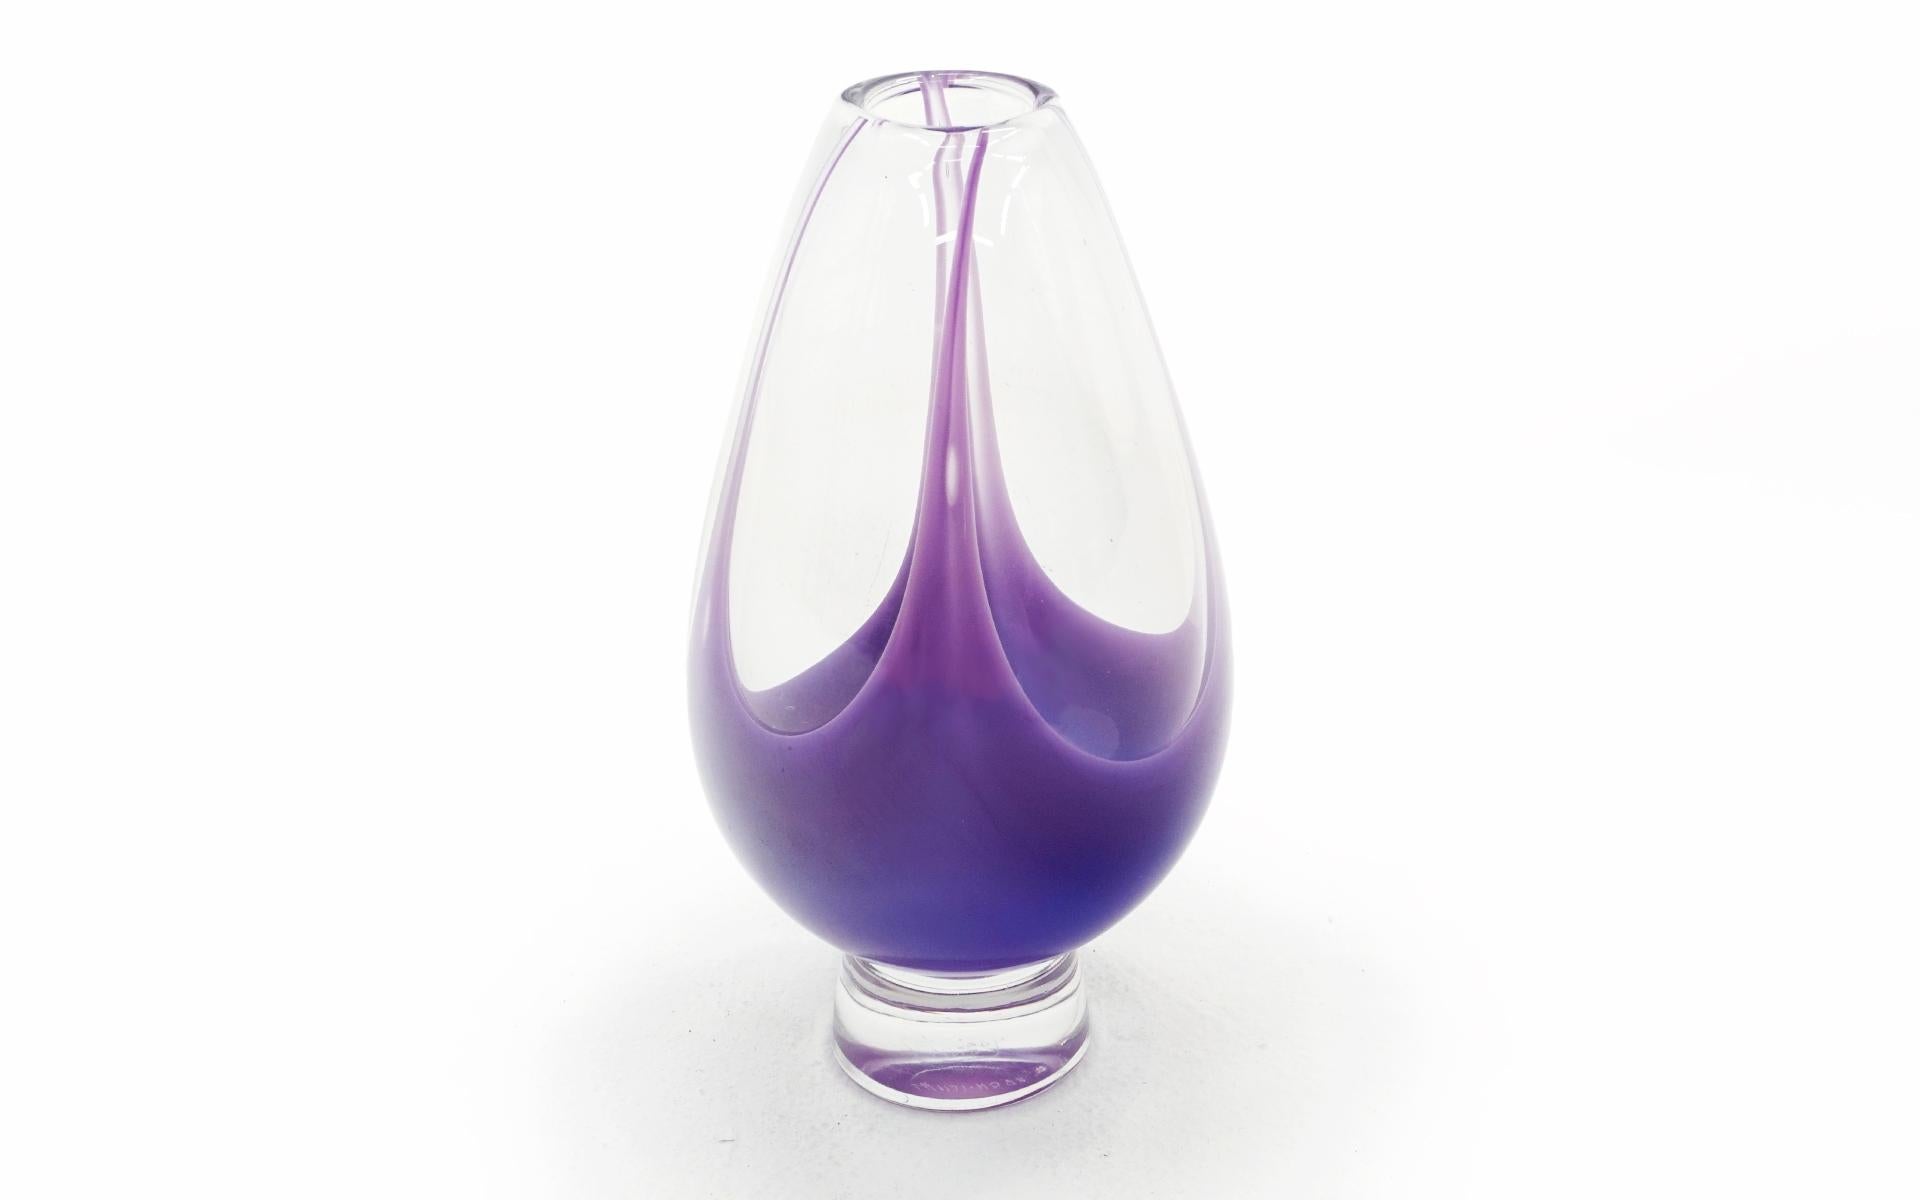 Purple and clear art glass vase by Vicke Lindstand for Kosta Boda, Sweden, 1950s. No cracks, chips or repairs. Might be light scratches to the bottom. Marked and numbered on the underside.